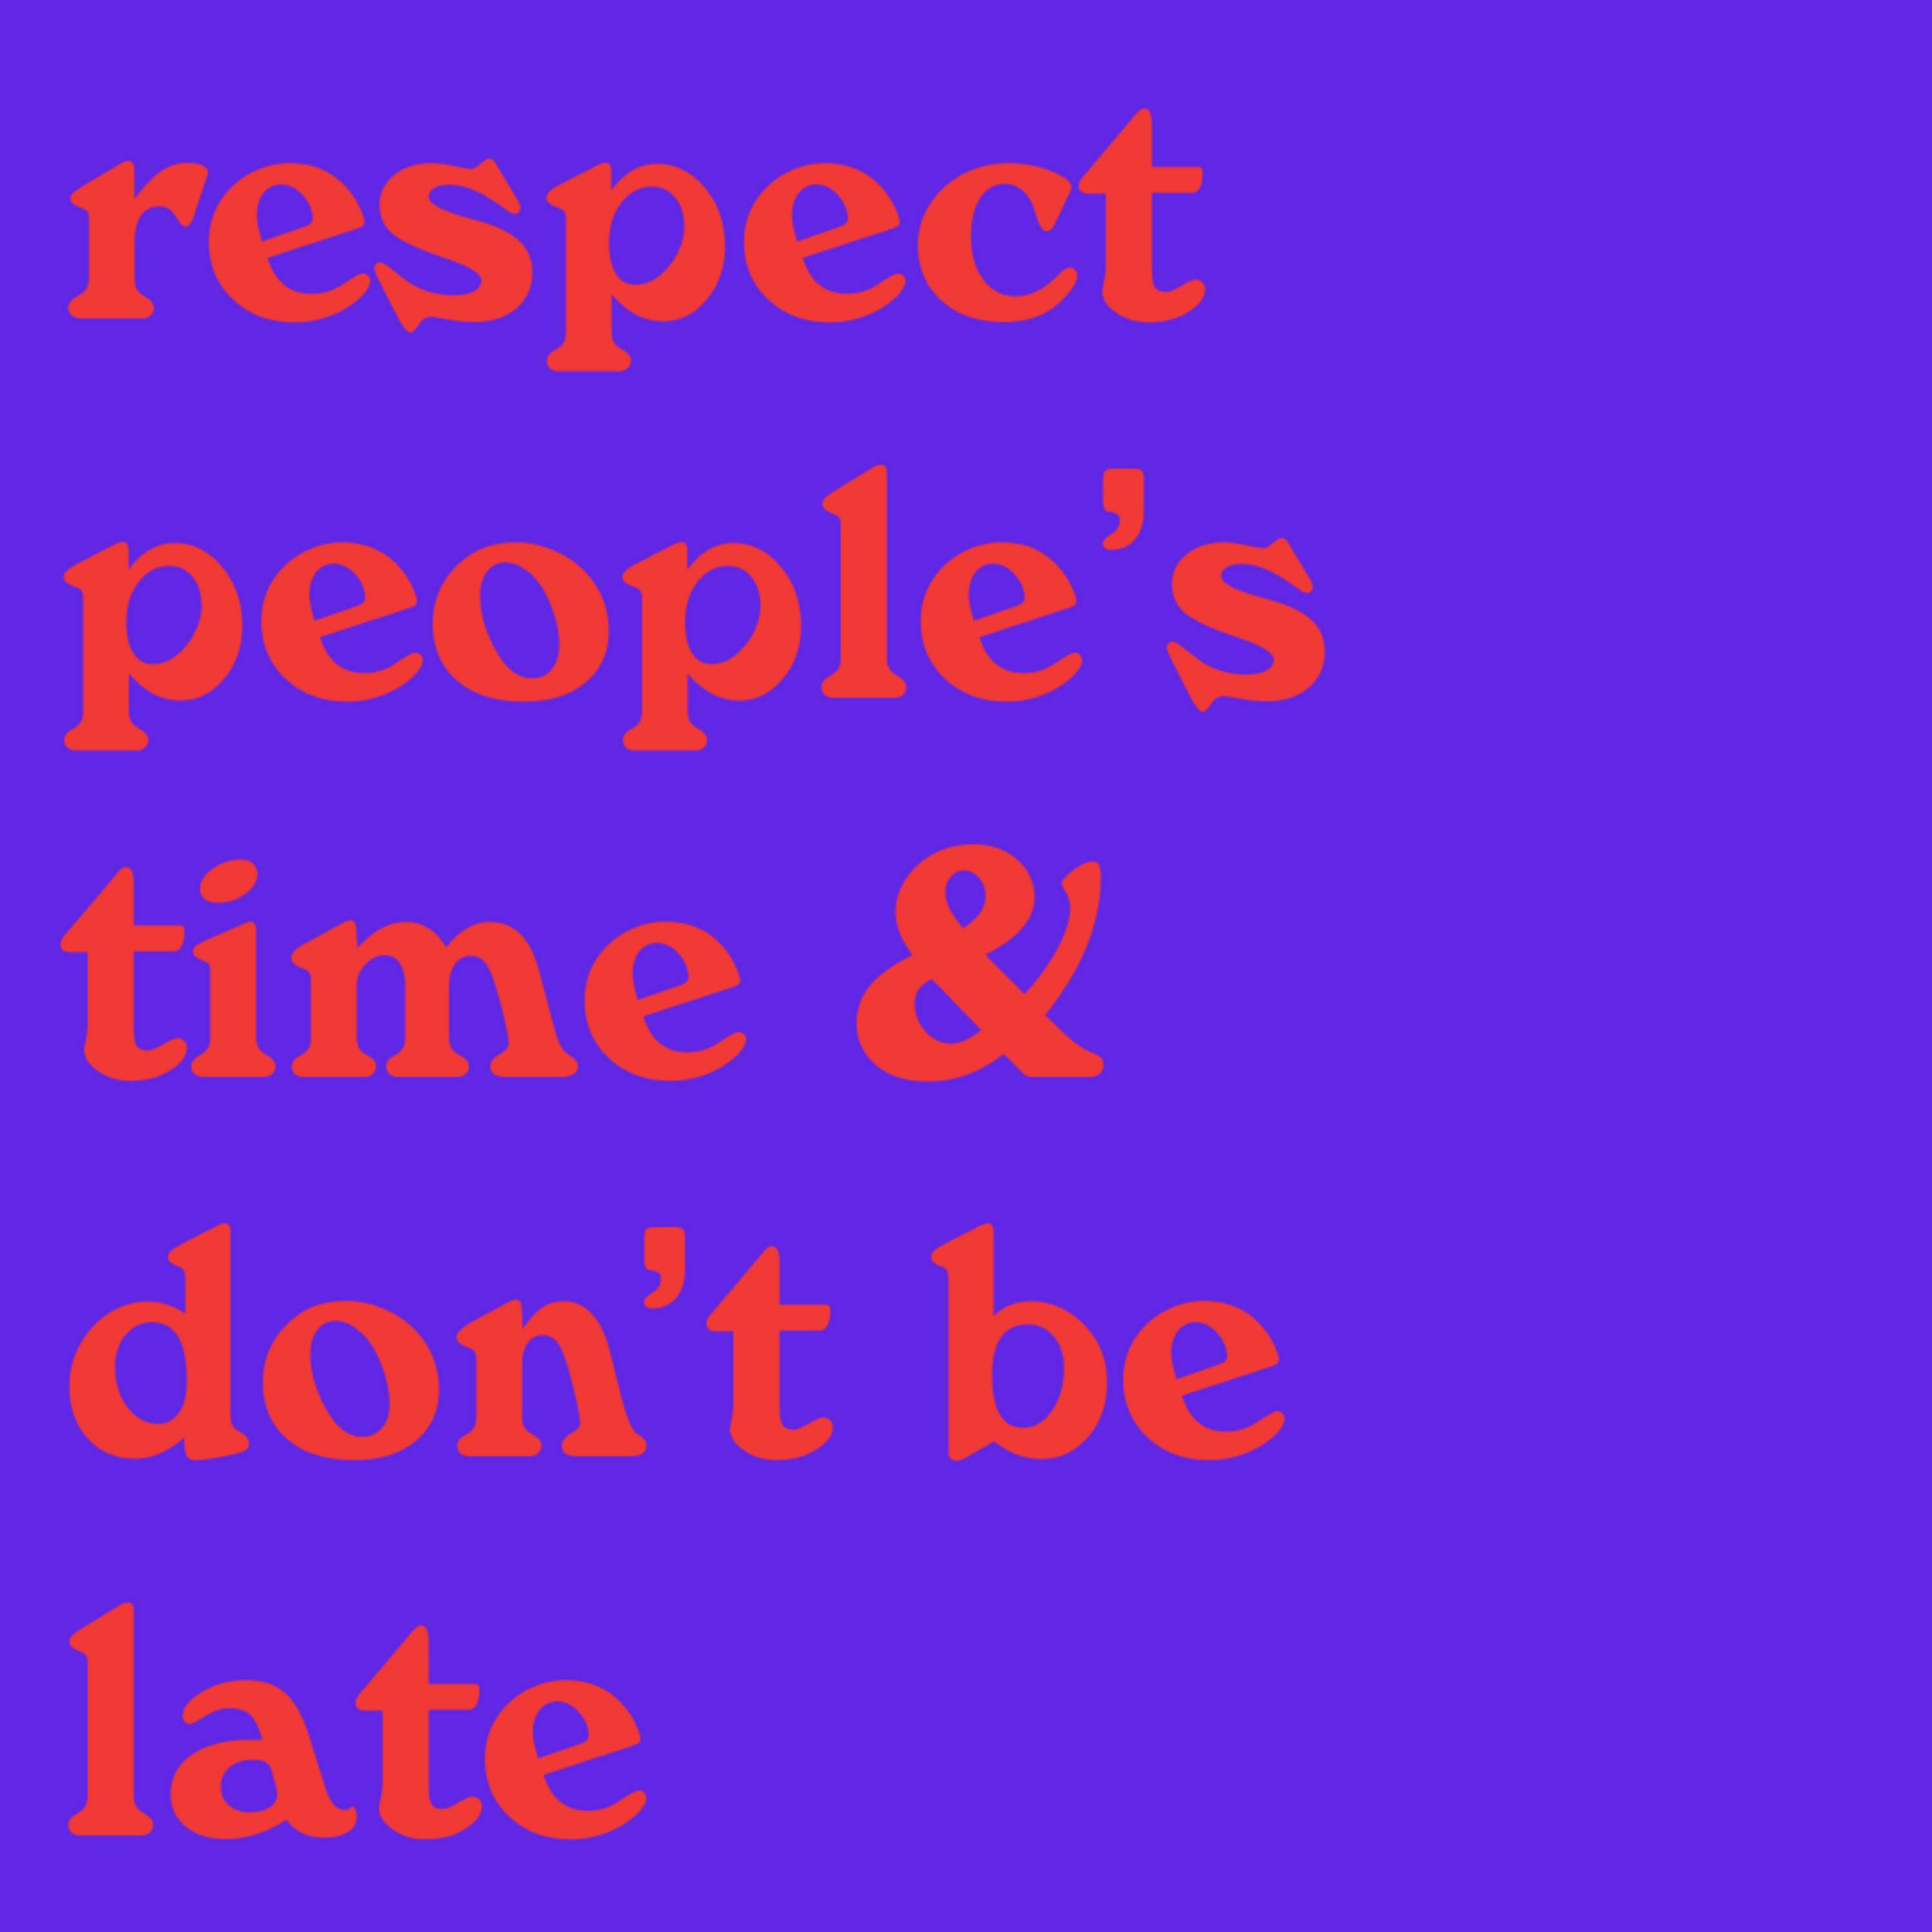 respecting people's time & constantly being late